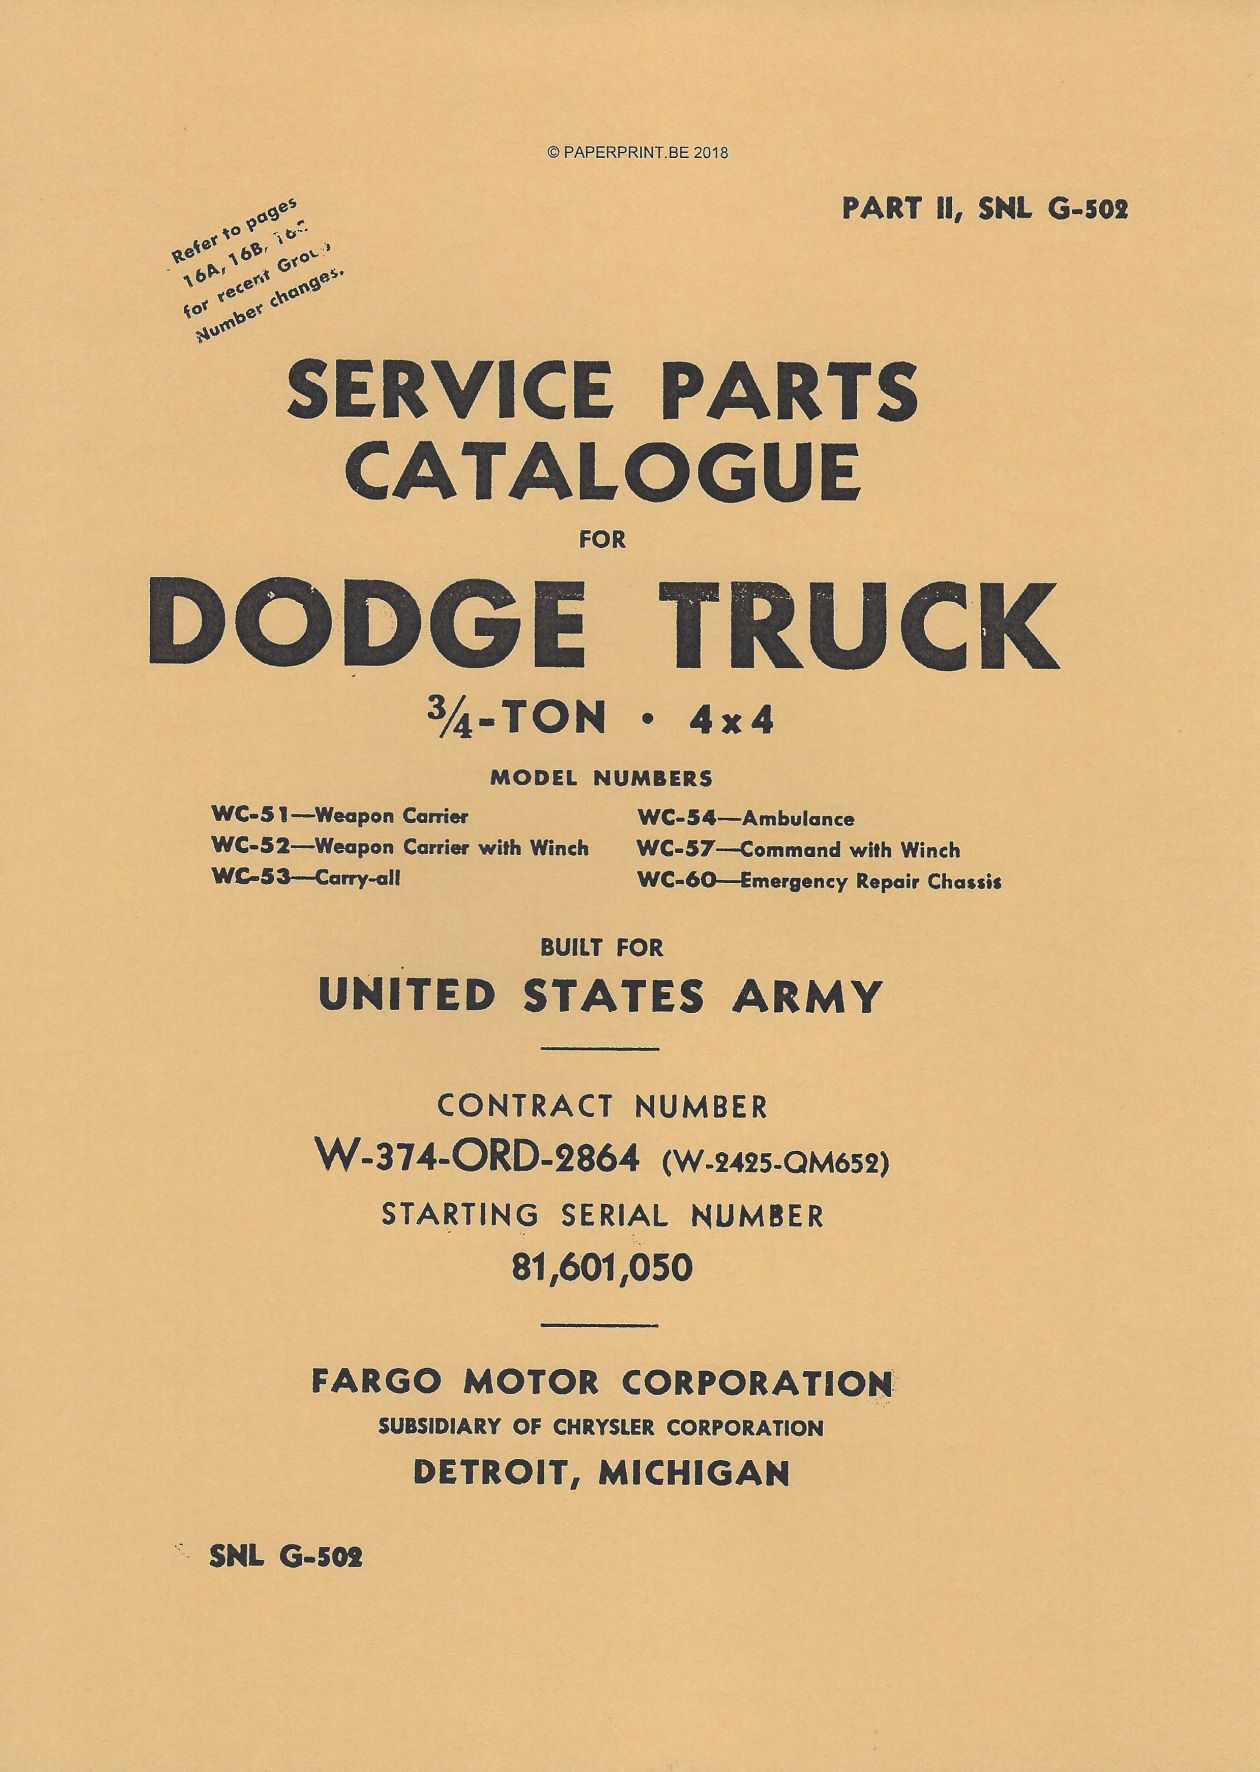 SNL G-502 EARLY SERVICE PARTS CATALOGUE FOR ¾ TON 4x4 DODGE WC